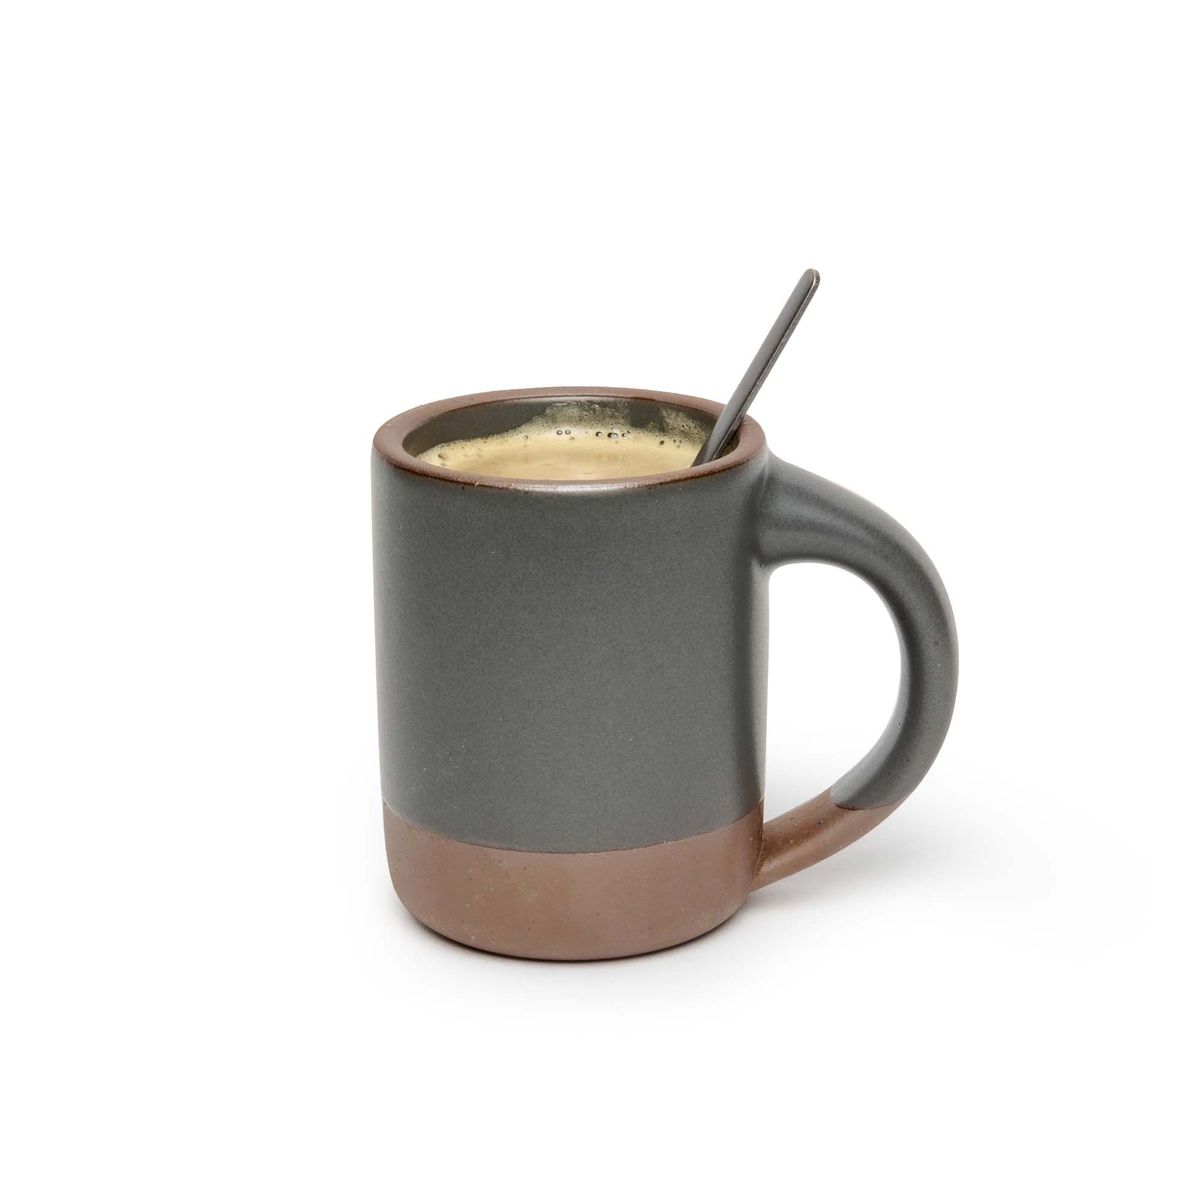 A medium sized ceramic mug with handle in a cool, medium grey color featuring iron speckles and unglazed rim and bottom base, filled with coffee and a spoon